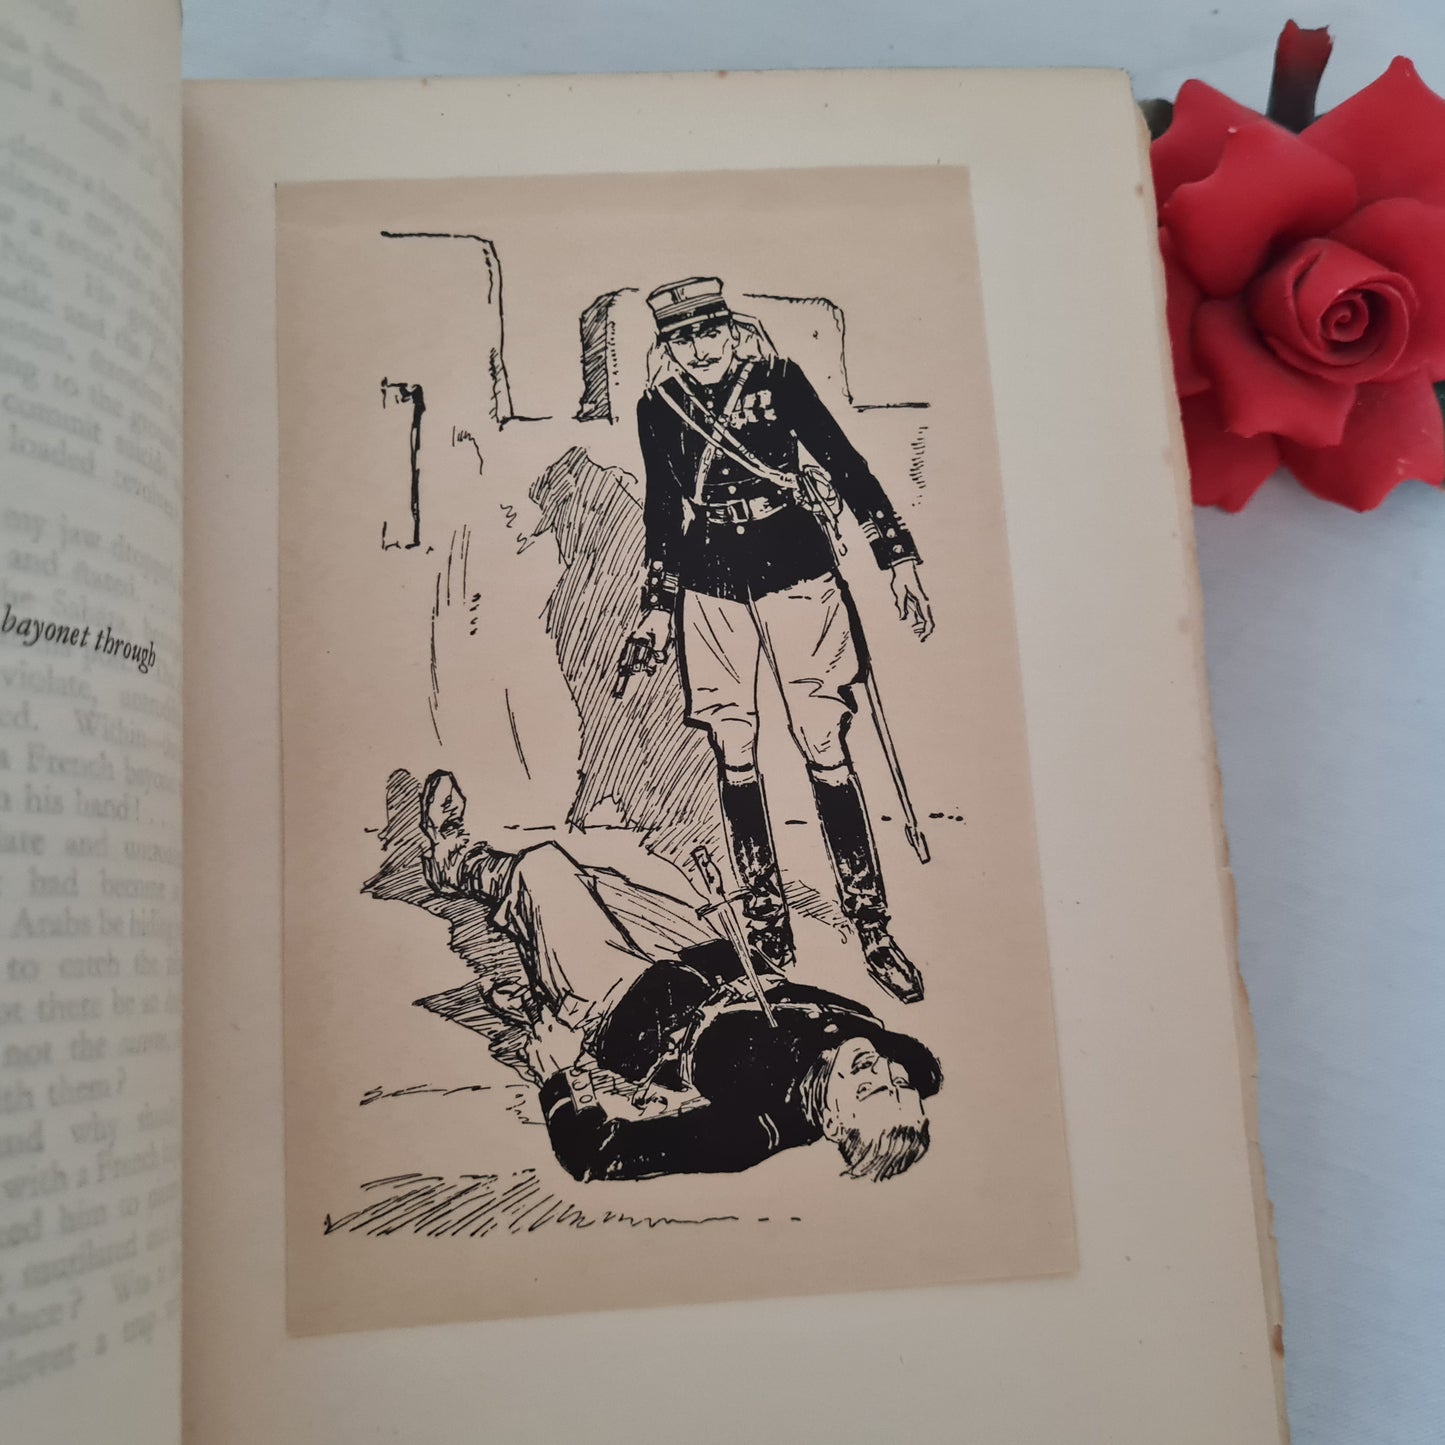 1927 Beau Geste by Percival Christopher Wren / SIGNED Deluxe Limited Edition Number 699 of 1,000 Copies / Bookplate Dedication By The Author